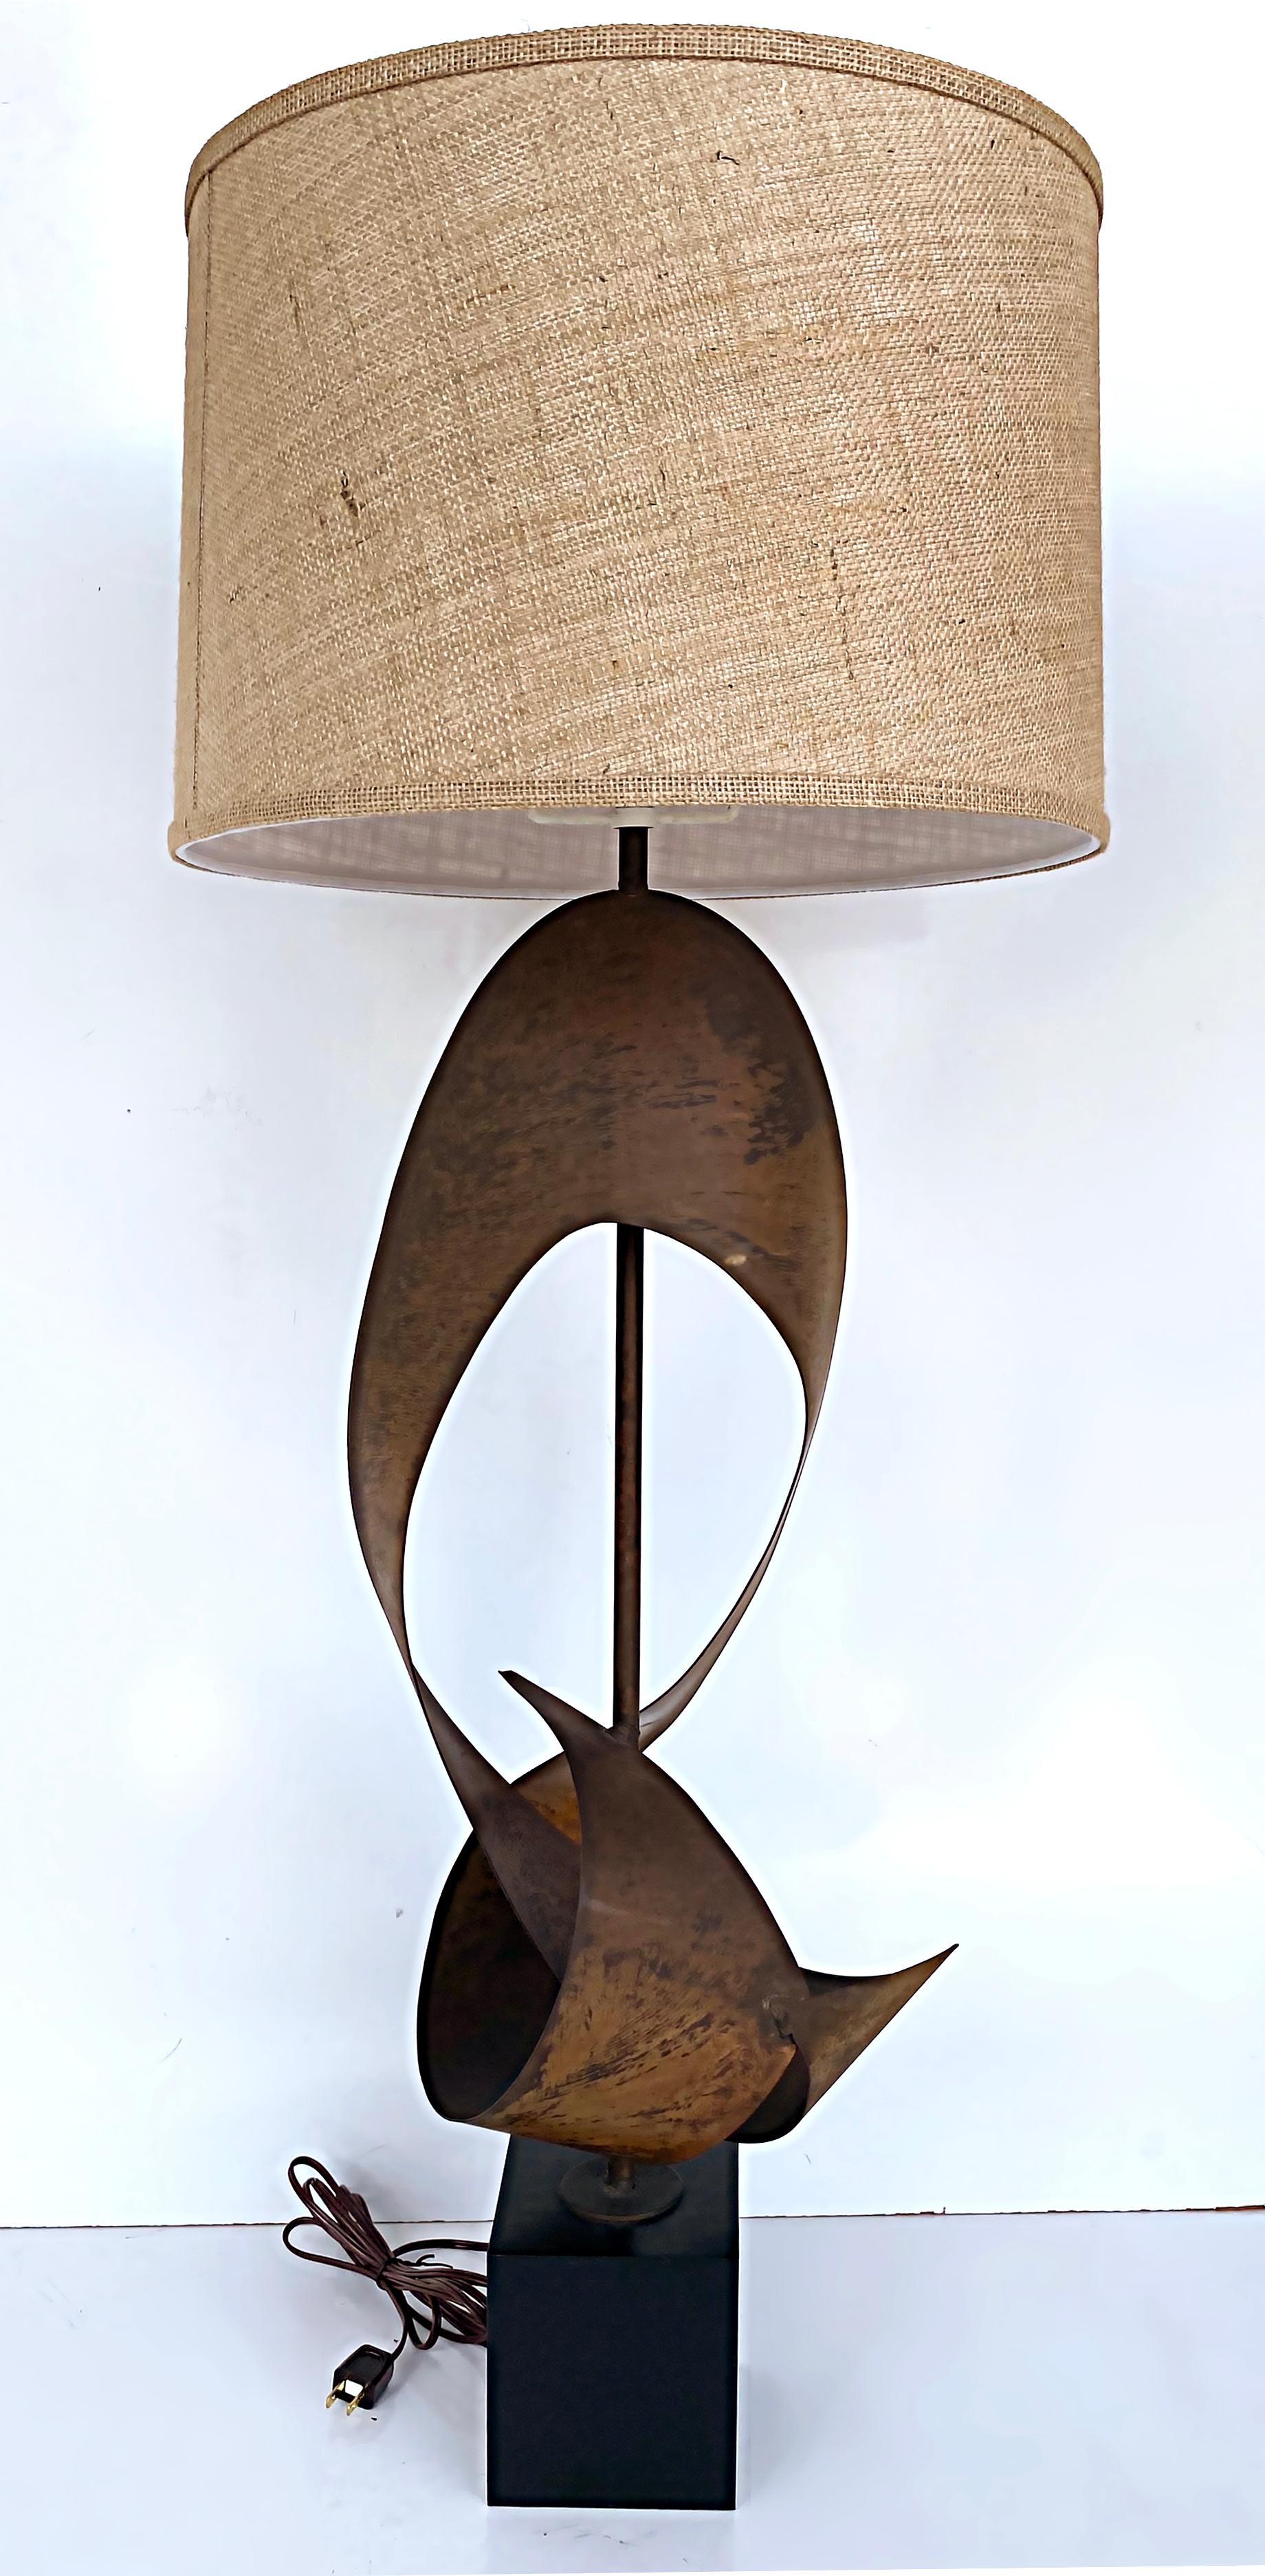 Brutalist Harry Balmer Harold Weiss Laurel Ribbon Table Lamps with New Shades

Offered for sale is a pair of 1970s monumental Brutalist Laurel table lamps by Harry Balmer and Harold Weiss. The lamps have a patinated ribbon form metal sculptural